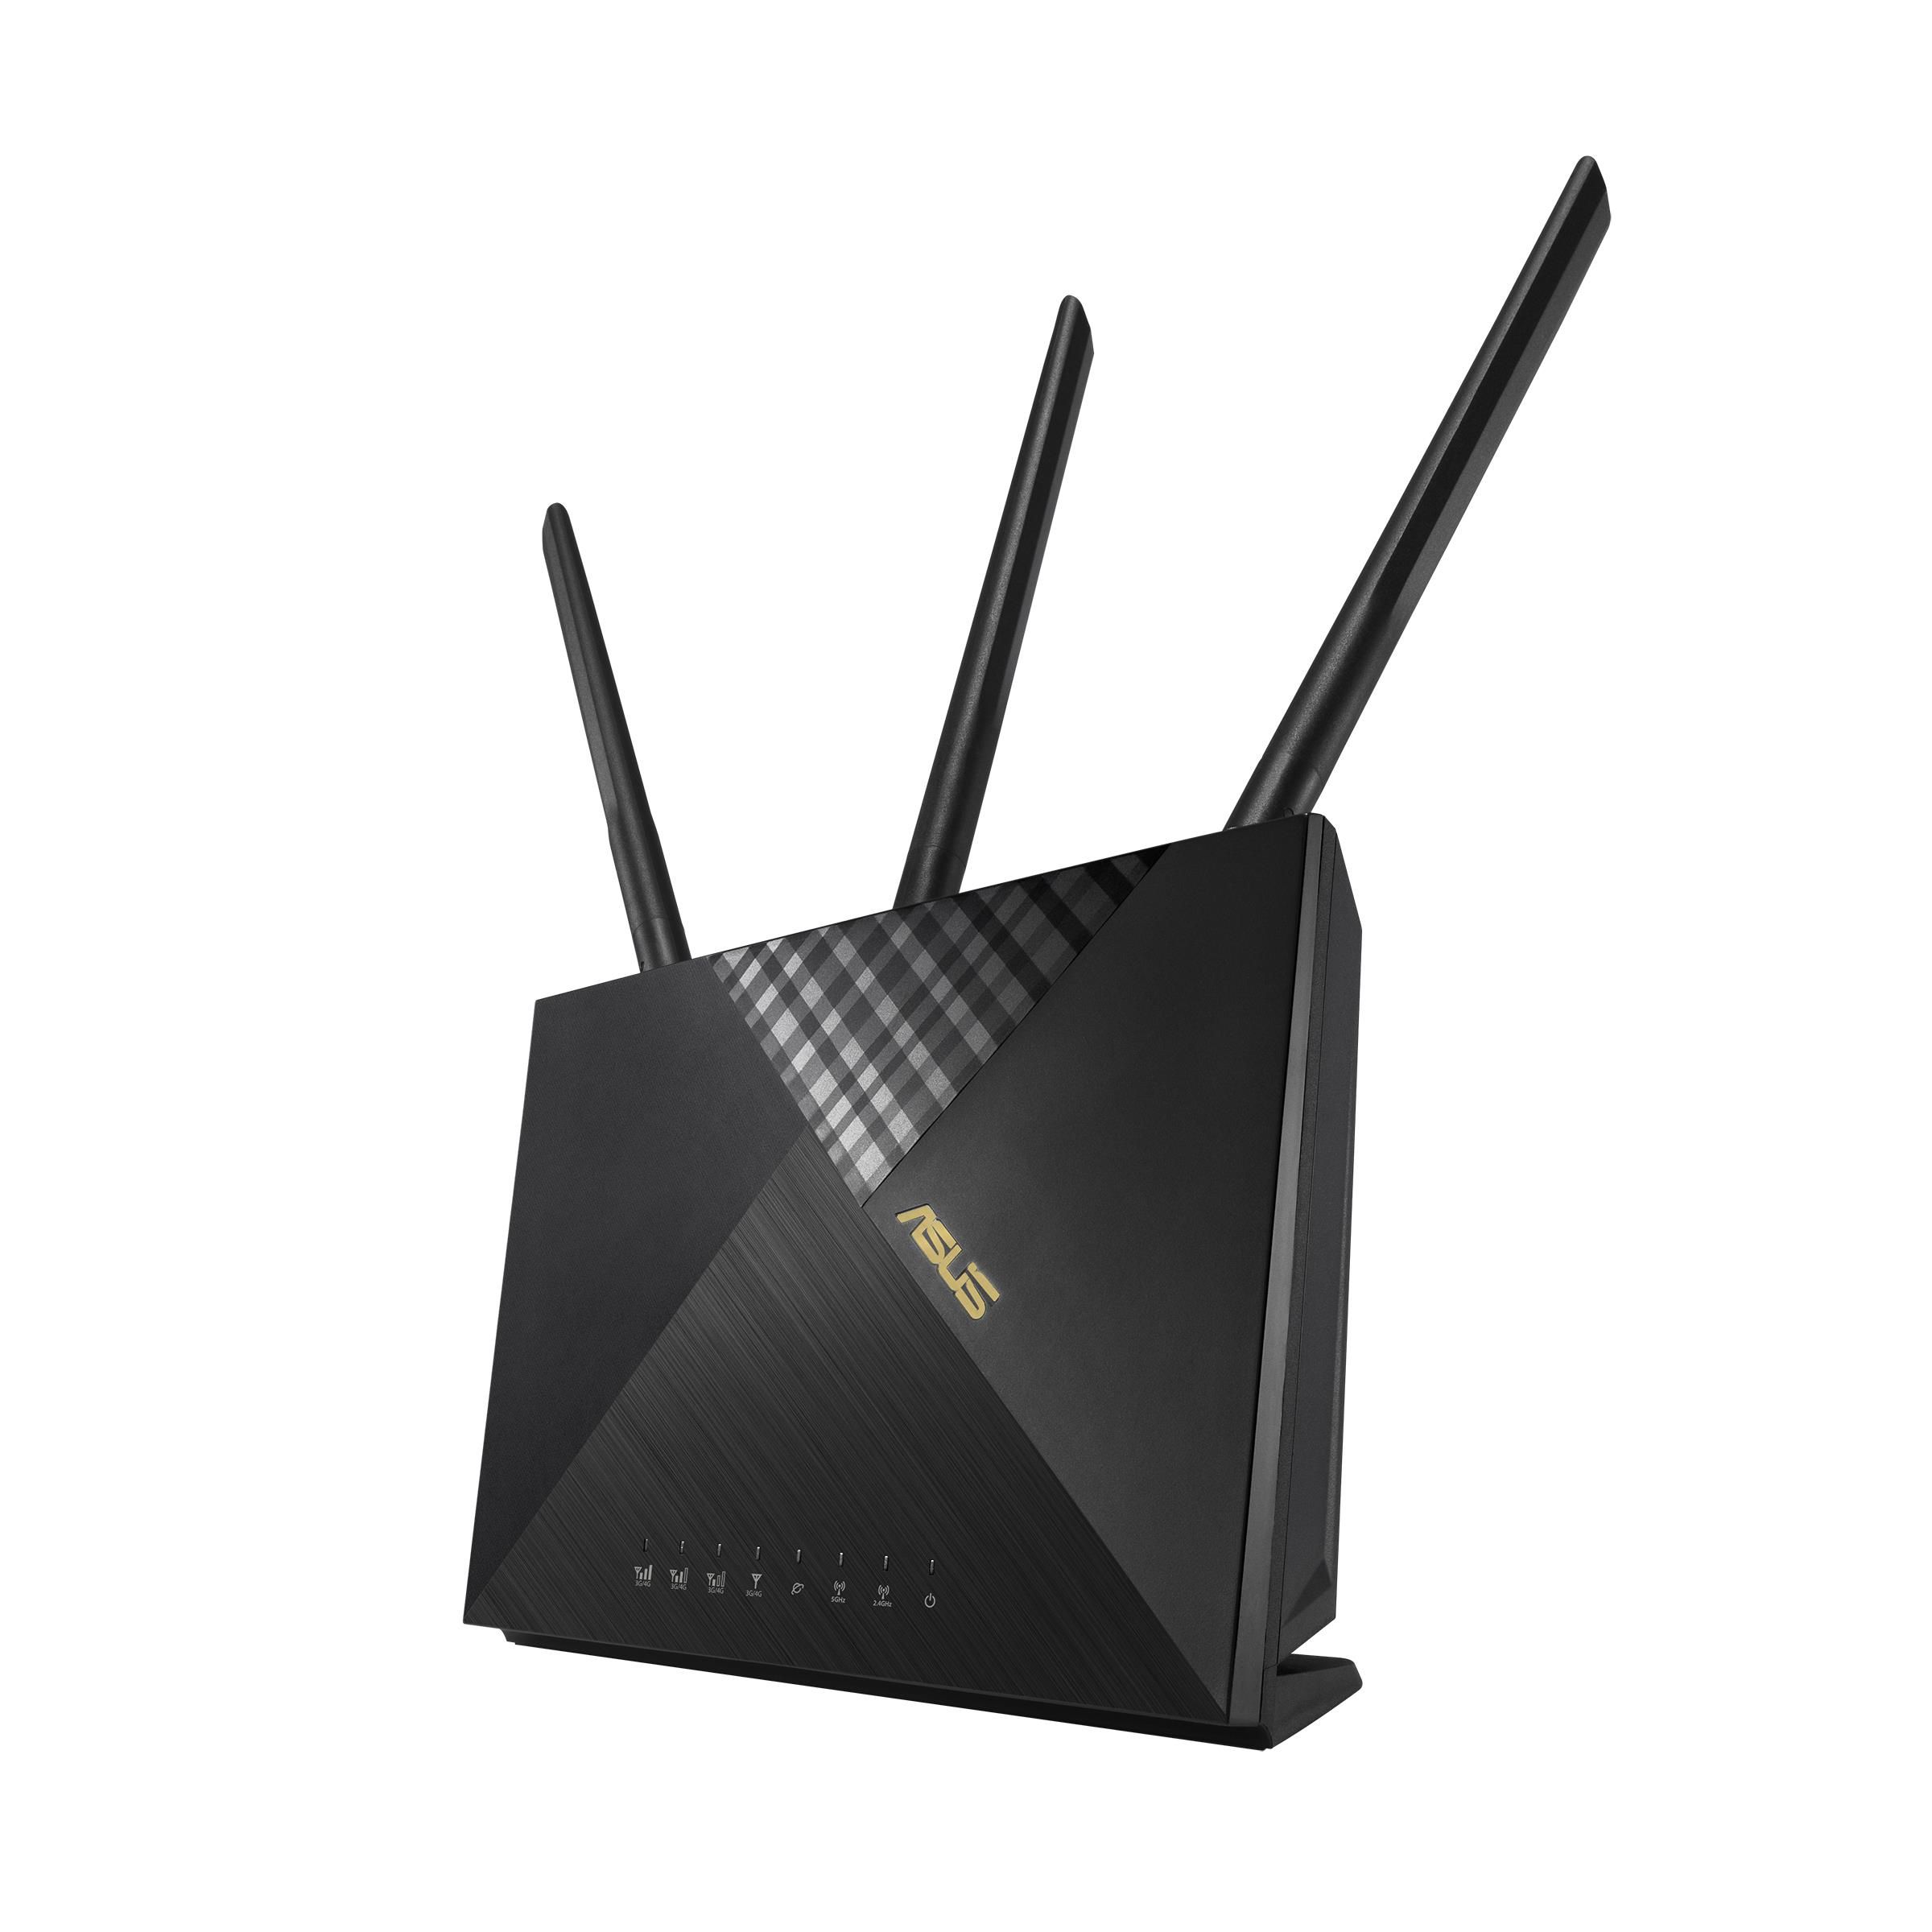 ASUS 4G-AX56 LTE Router